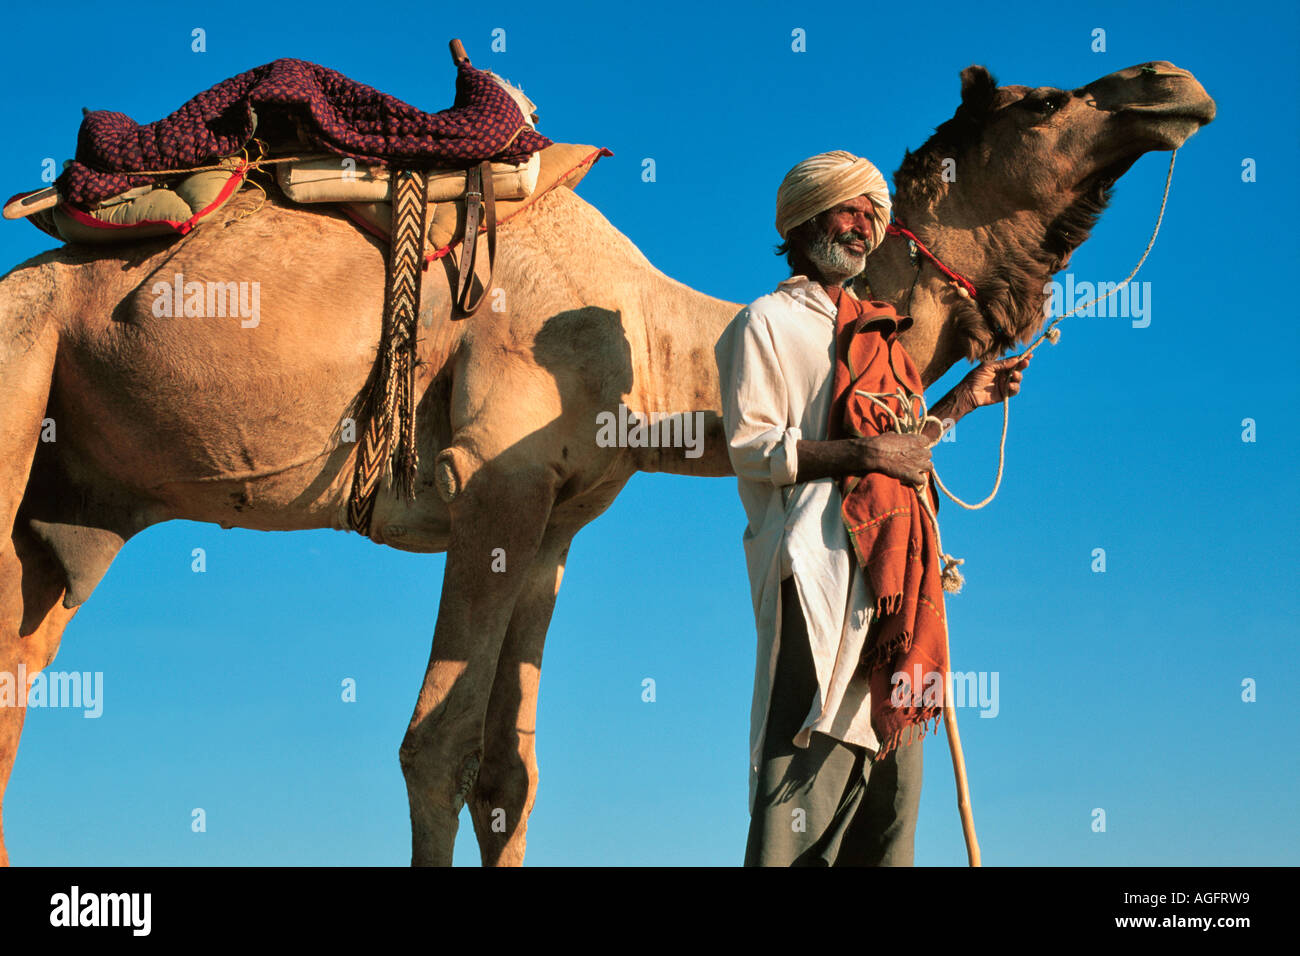 images Camel hi-res and Alamy - master photography stock